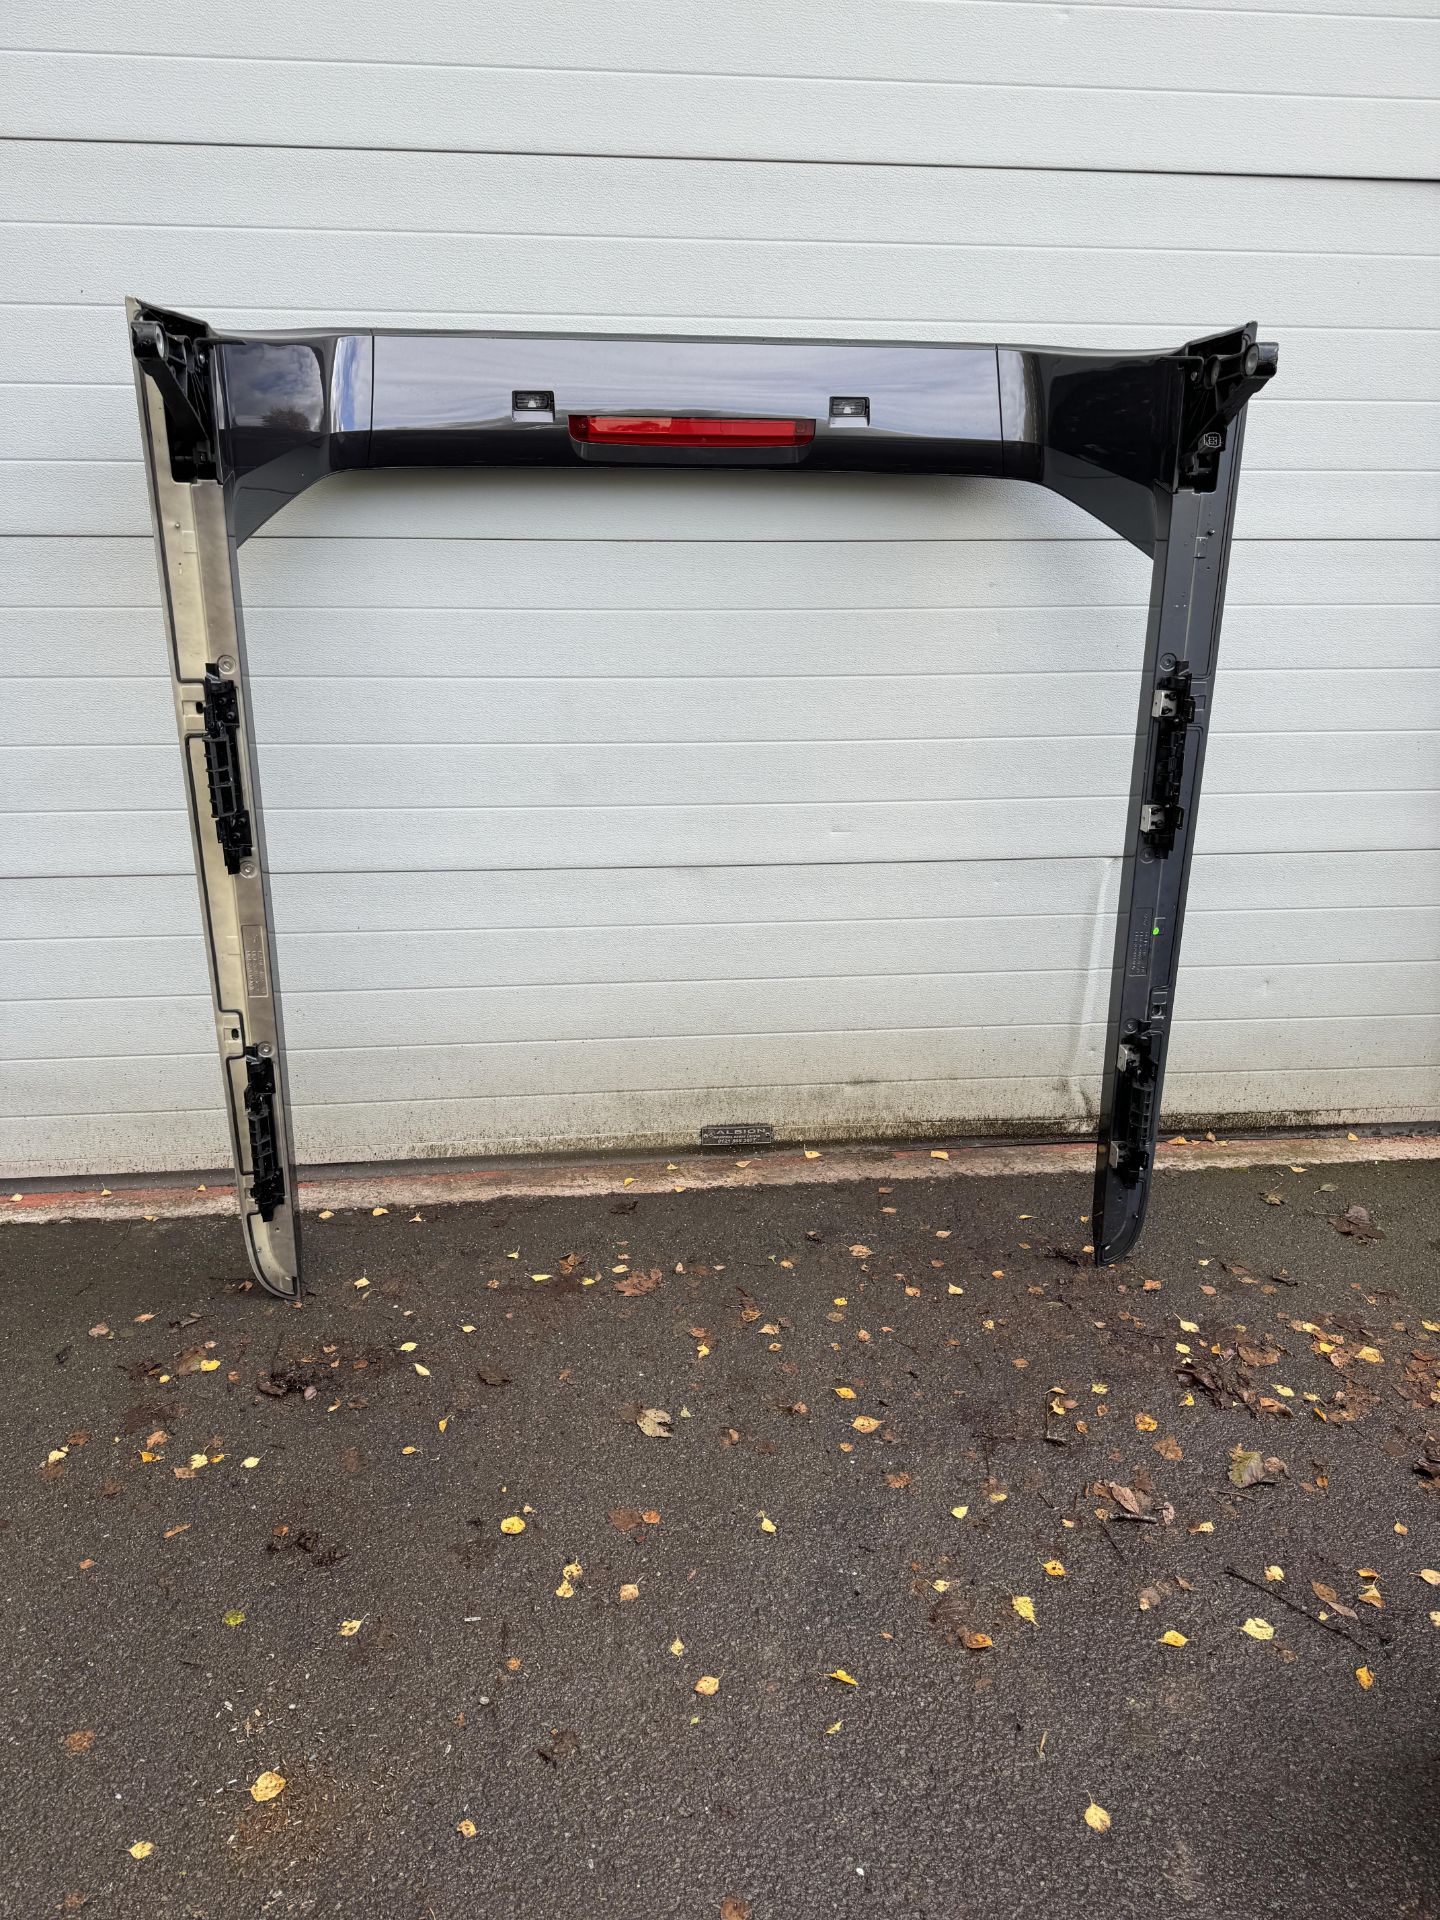 Genuine Ford Ranger Black Roller Tonneau Cover with Parts & Fixings as Shown - Further Details to be - Image 37 of 43